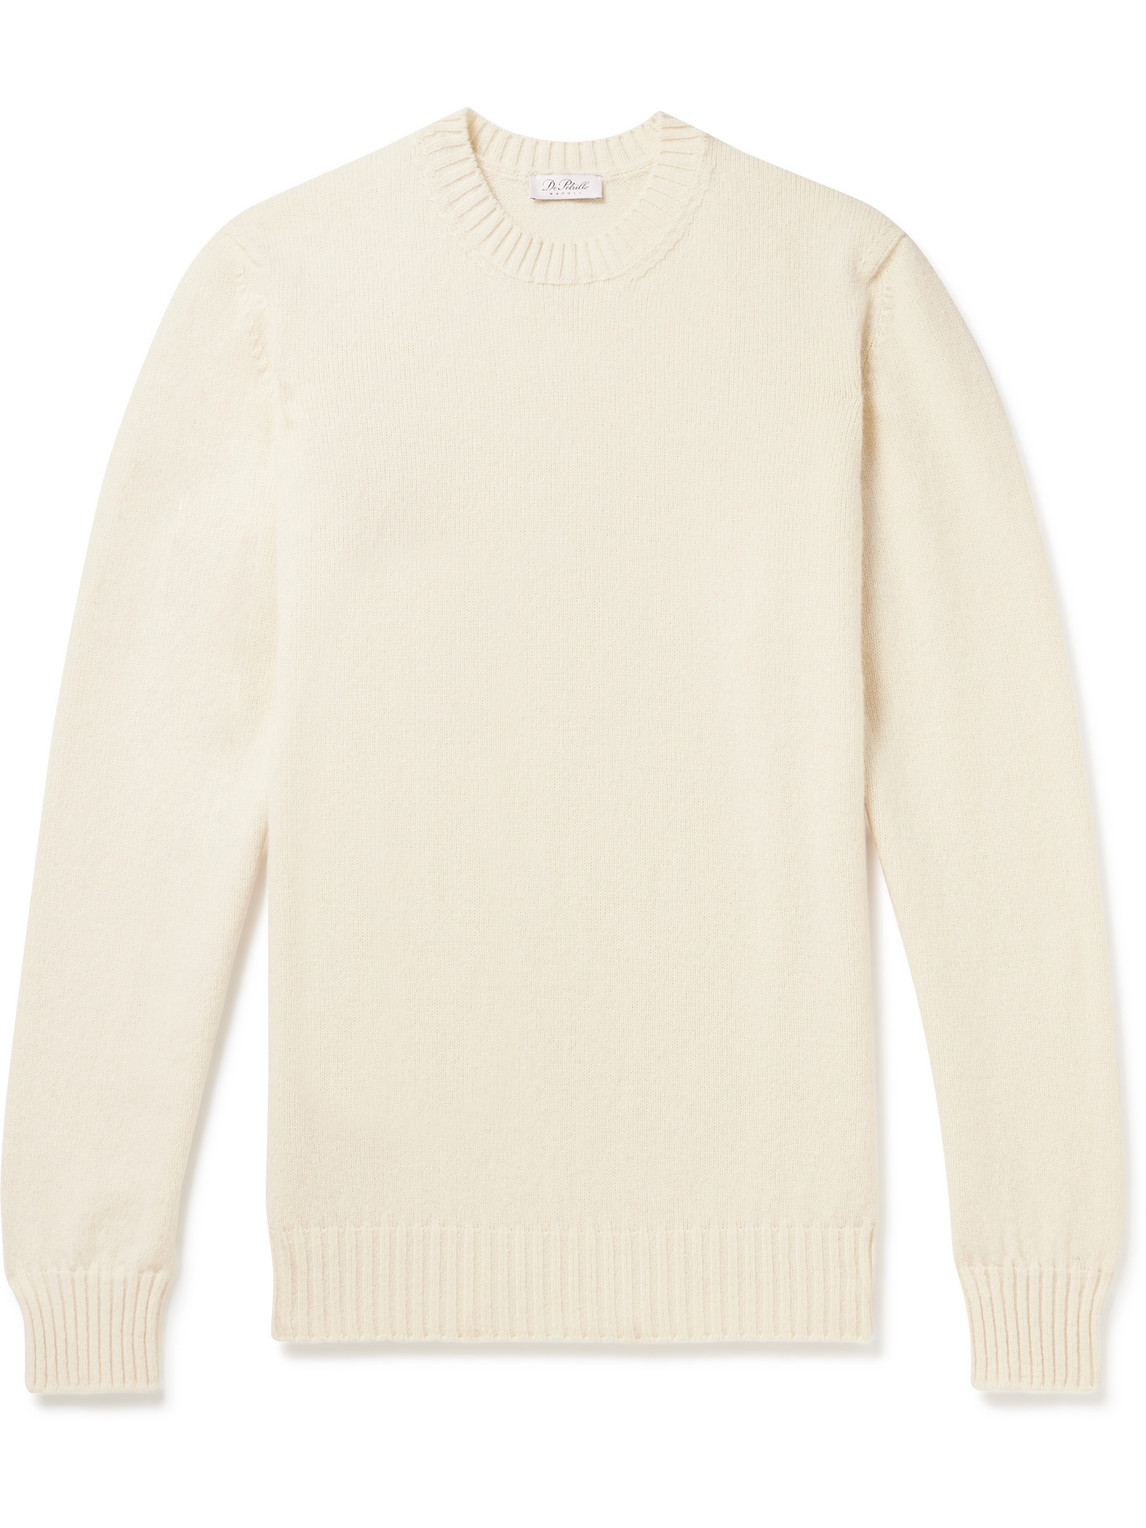 Merino Wool and Cashmere-Blend Sweater